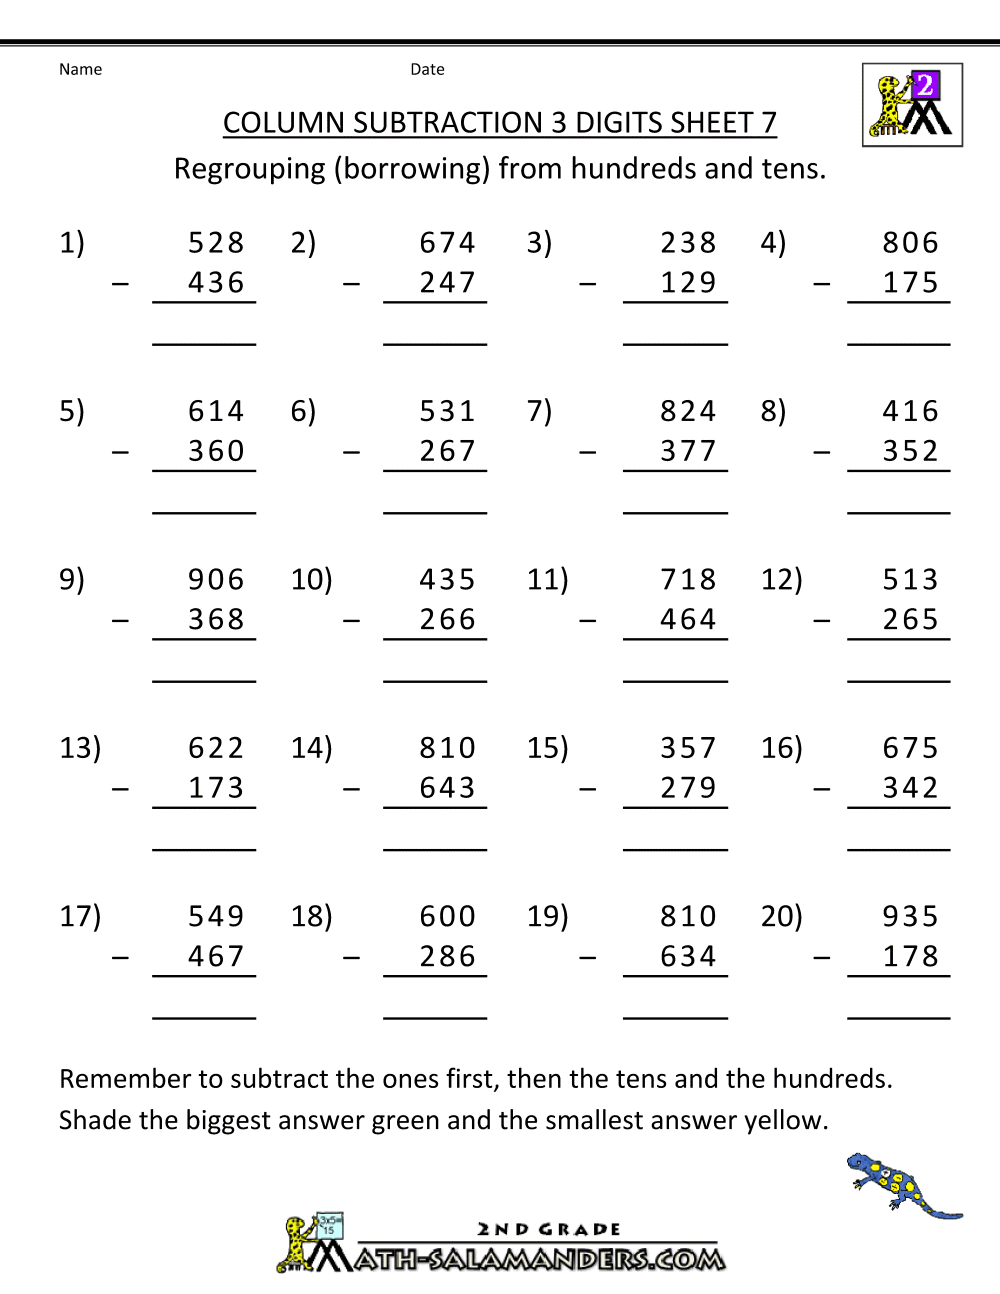 subtraction-with-regrouping-worksheets